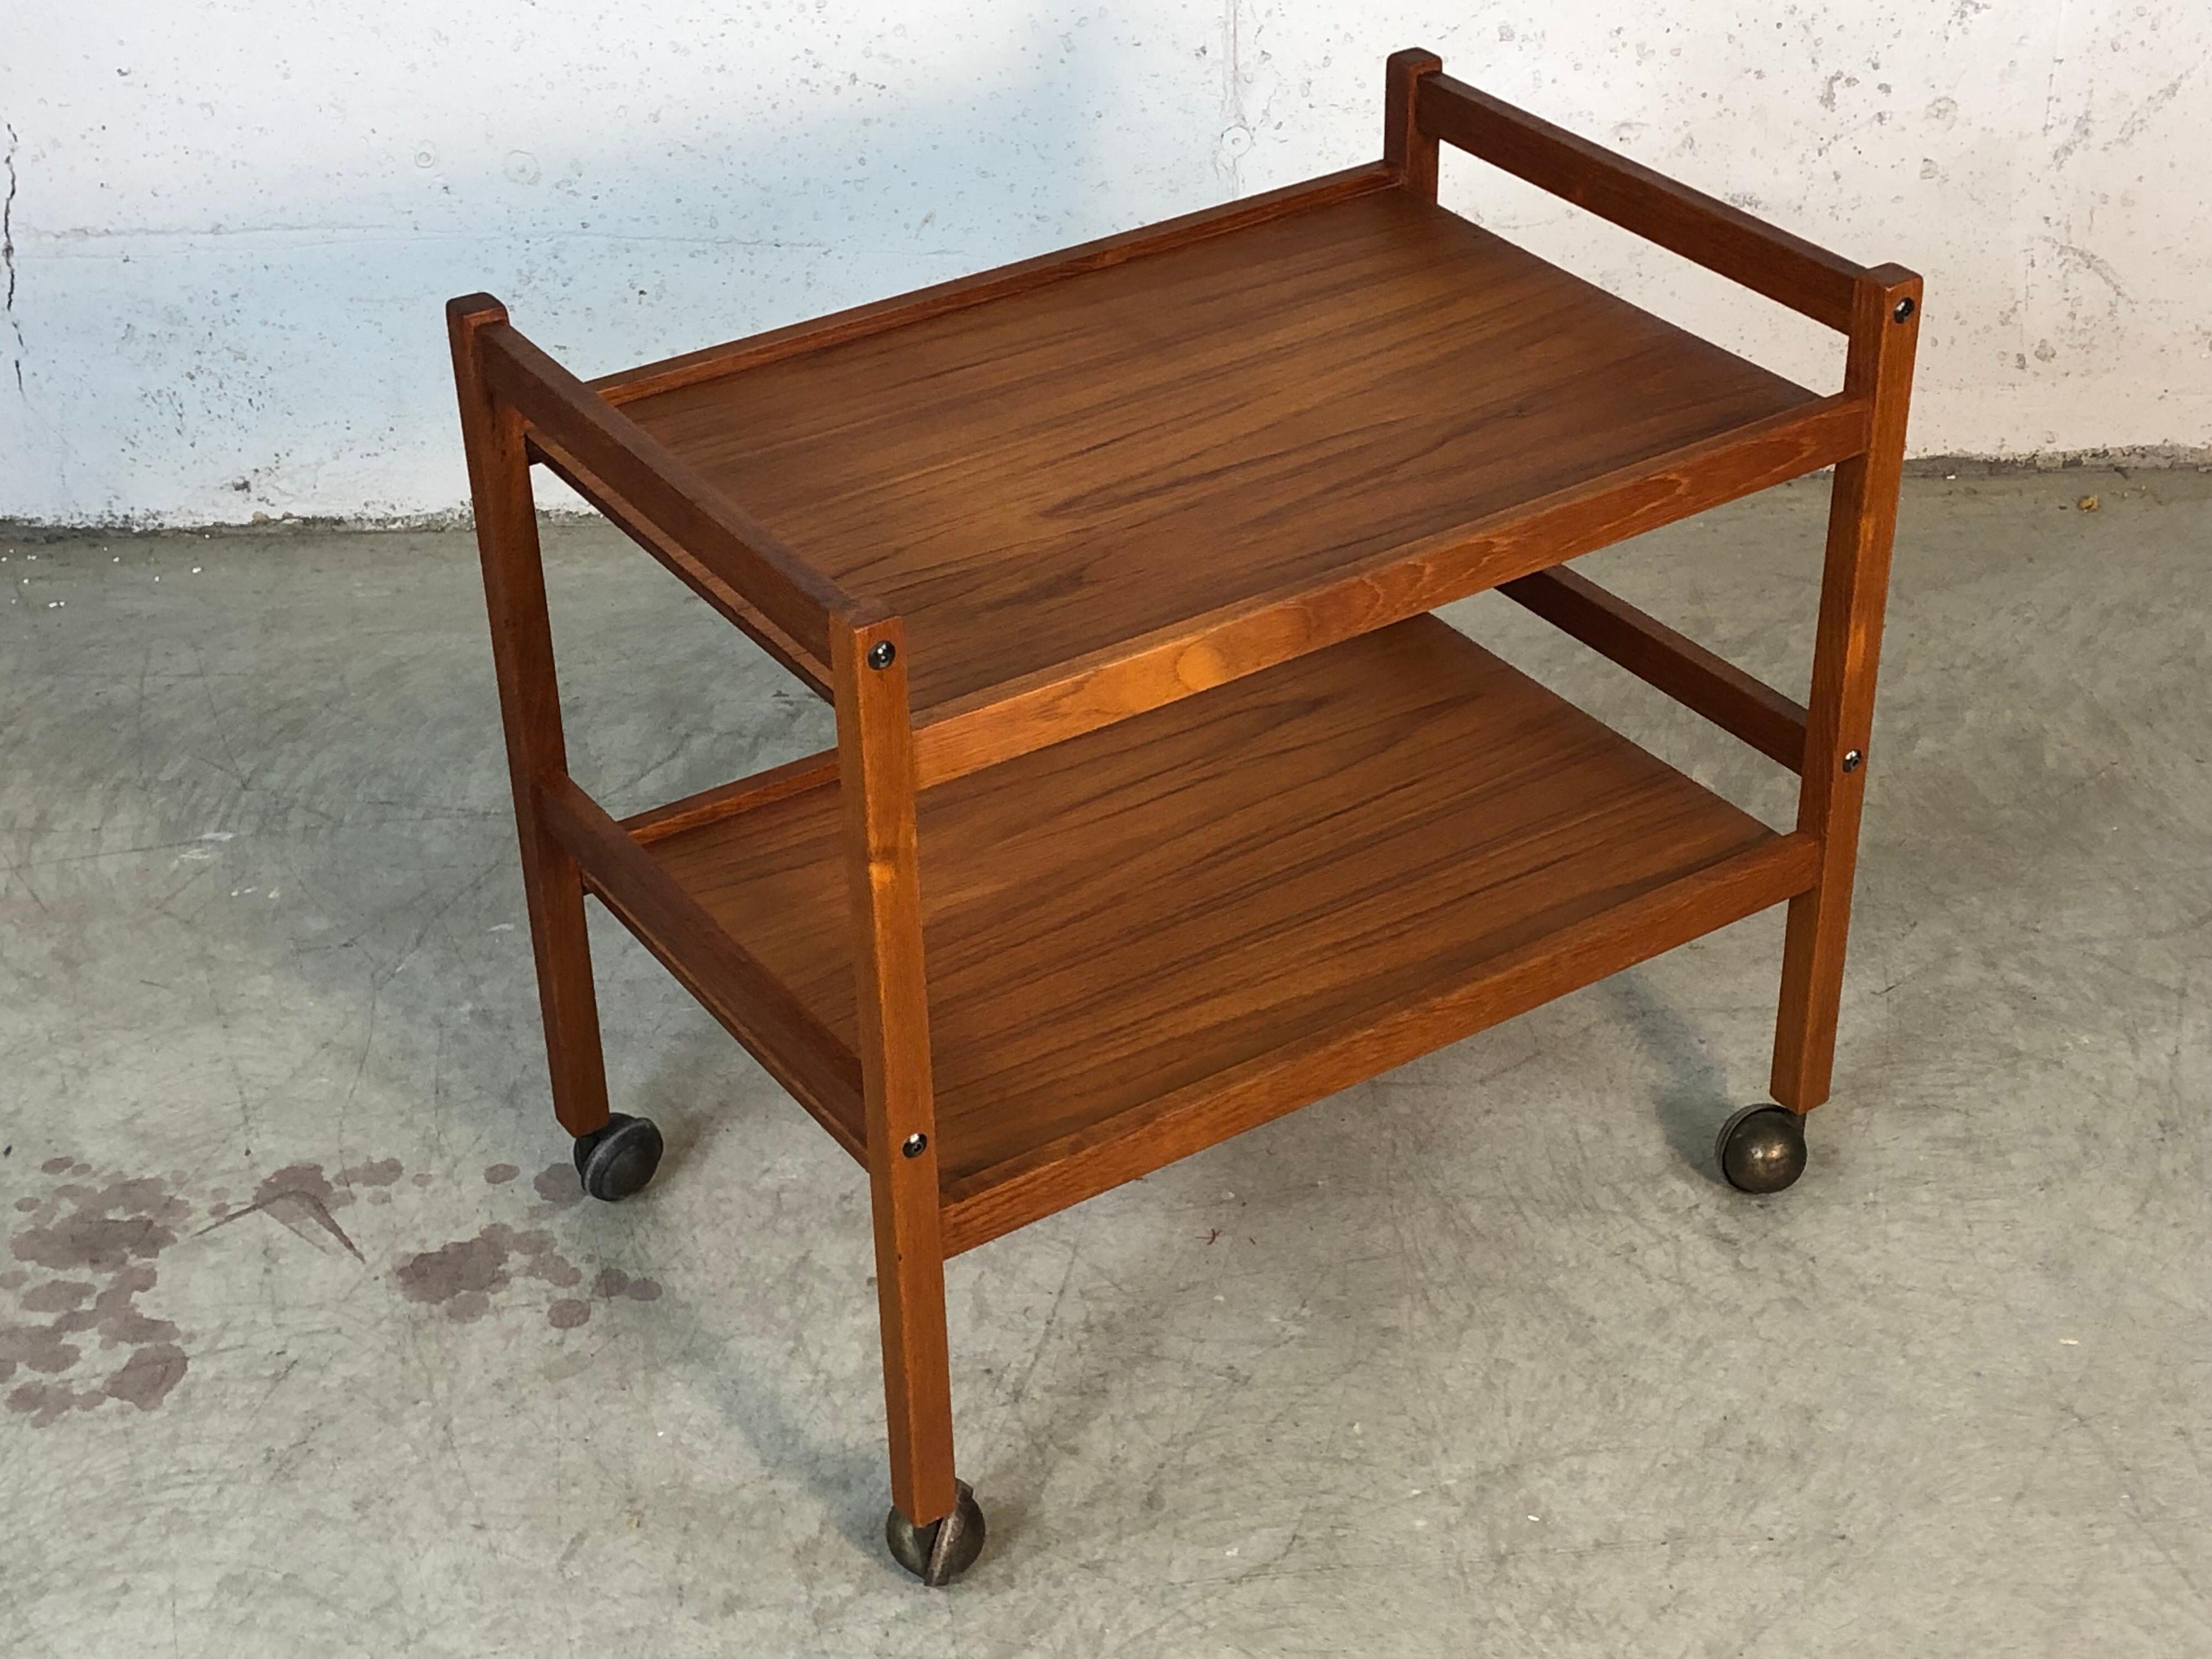 Vintage 1970s Danish teak two-tier rolling cart. The cart is in newly refinished condition. It is marked underneath, Furbo Made in Denmark.